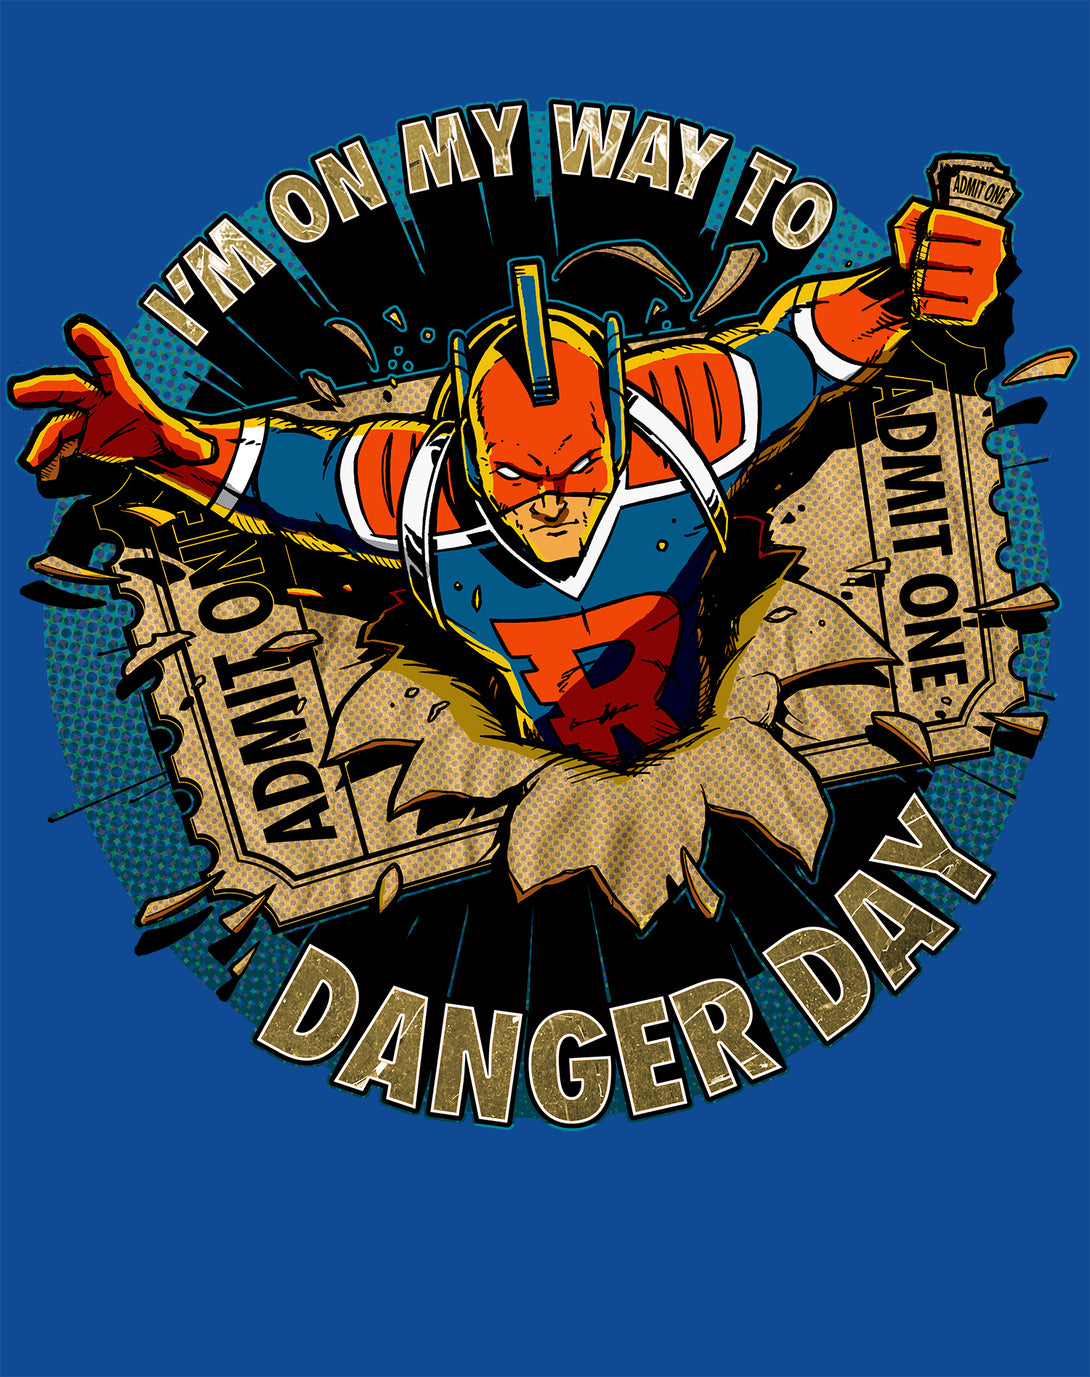 Kevin Smith View Askewniverse Danger Days Logo LDN Edition Official Men's T-Shirt Blue - Urban Species Design Close Up